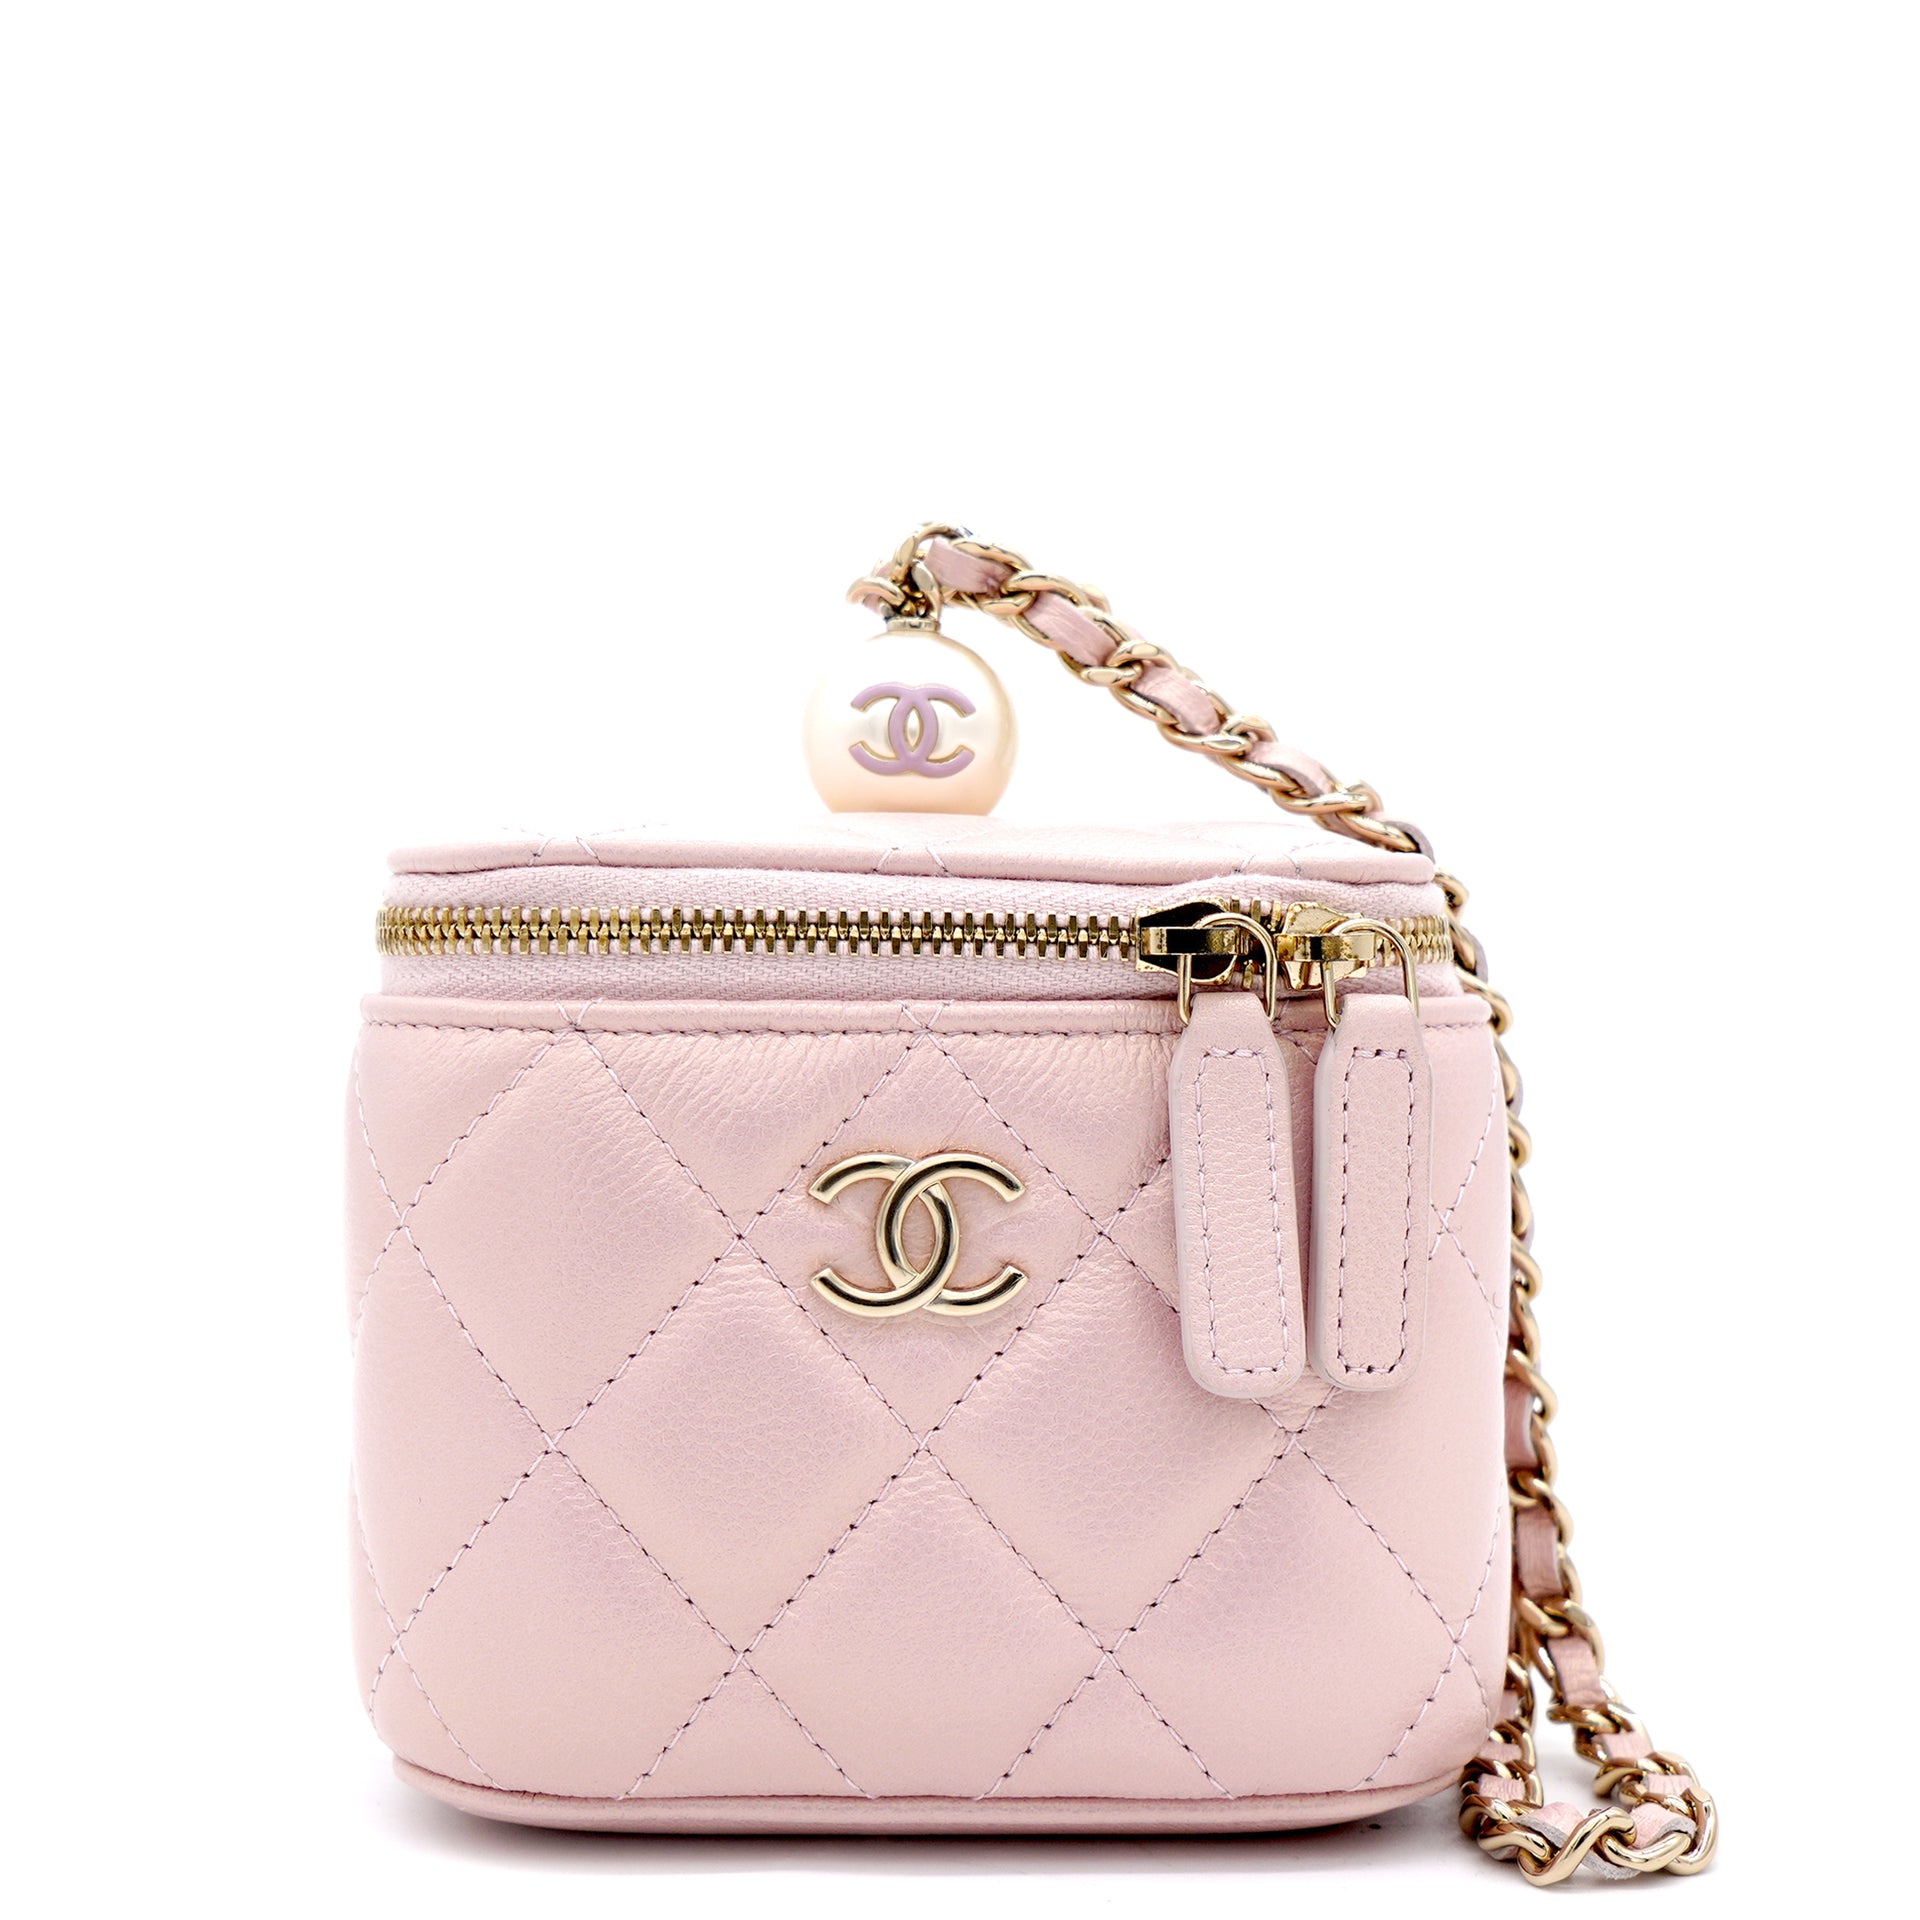 Chanel Mini Caviar GHW Vanity Case with Pearl Details Light Pink